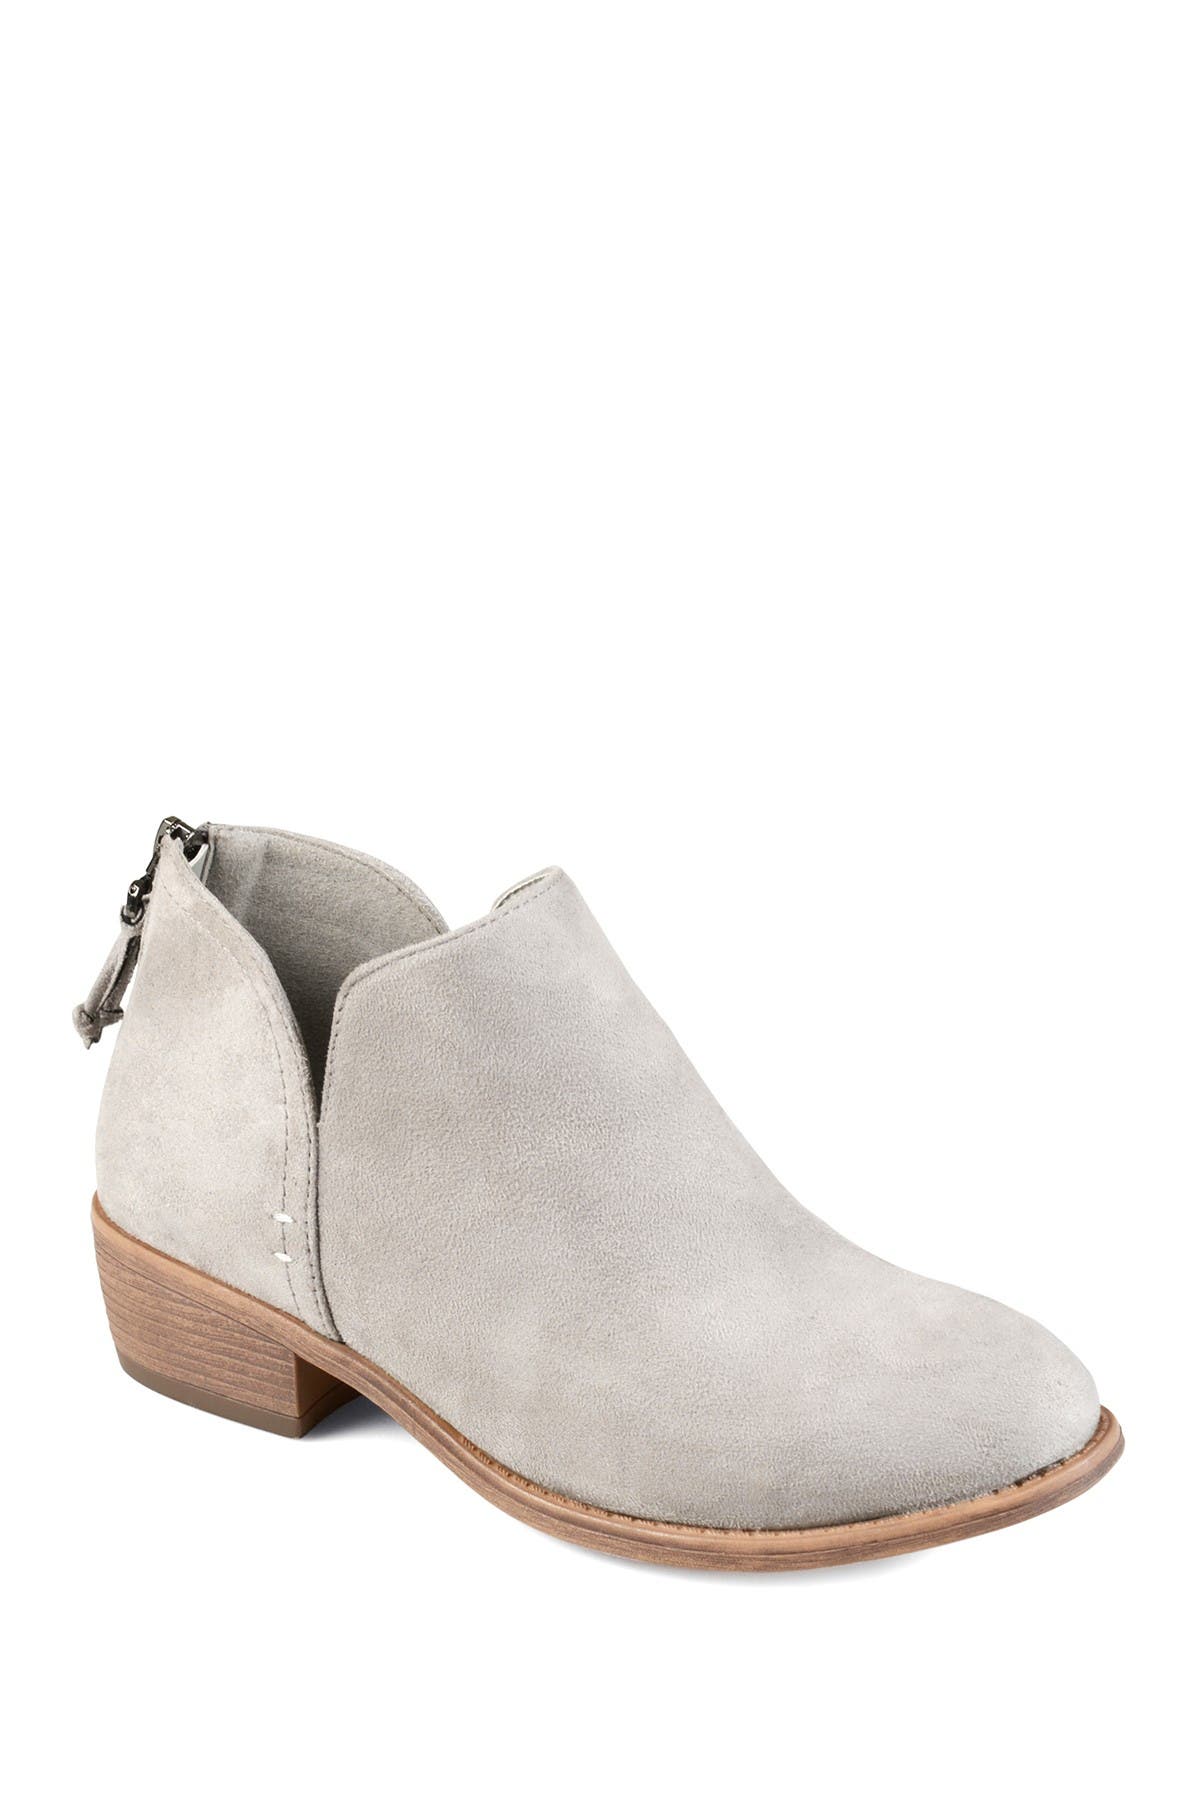 JOURNEE Collection | Livvy Ankle Bootie 